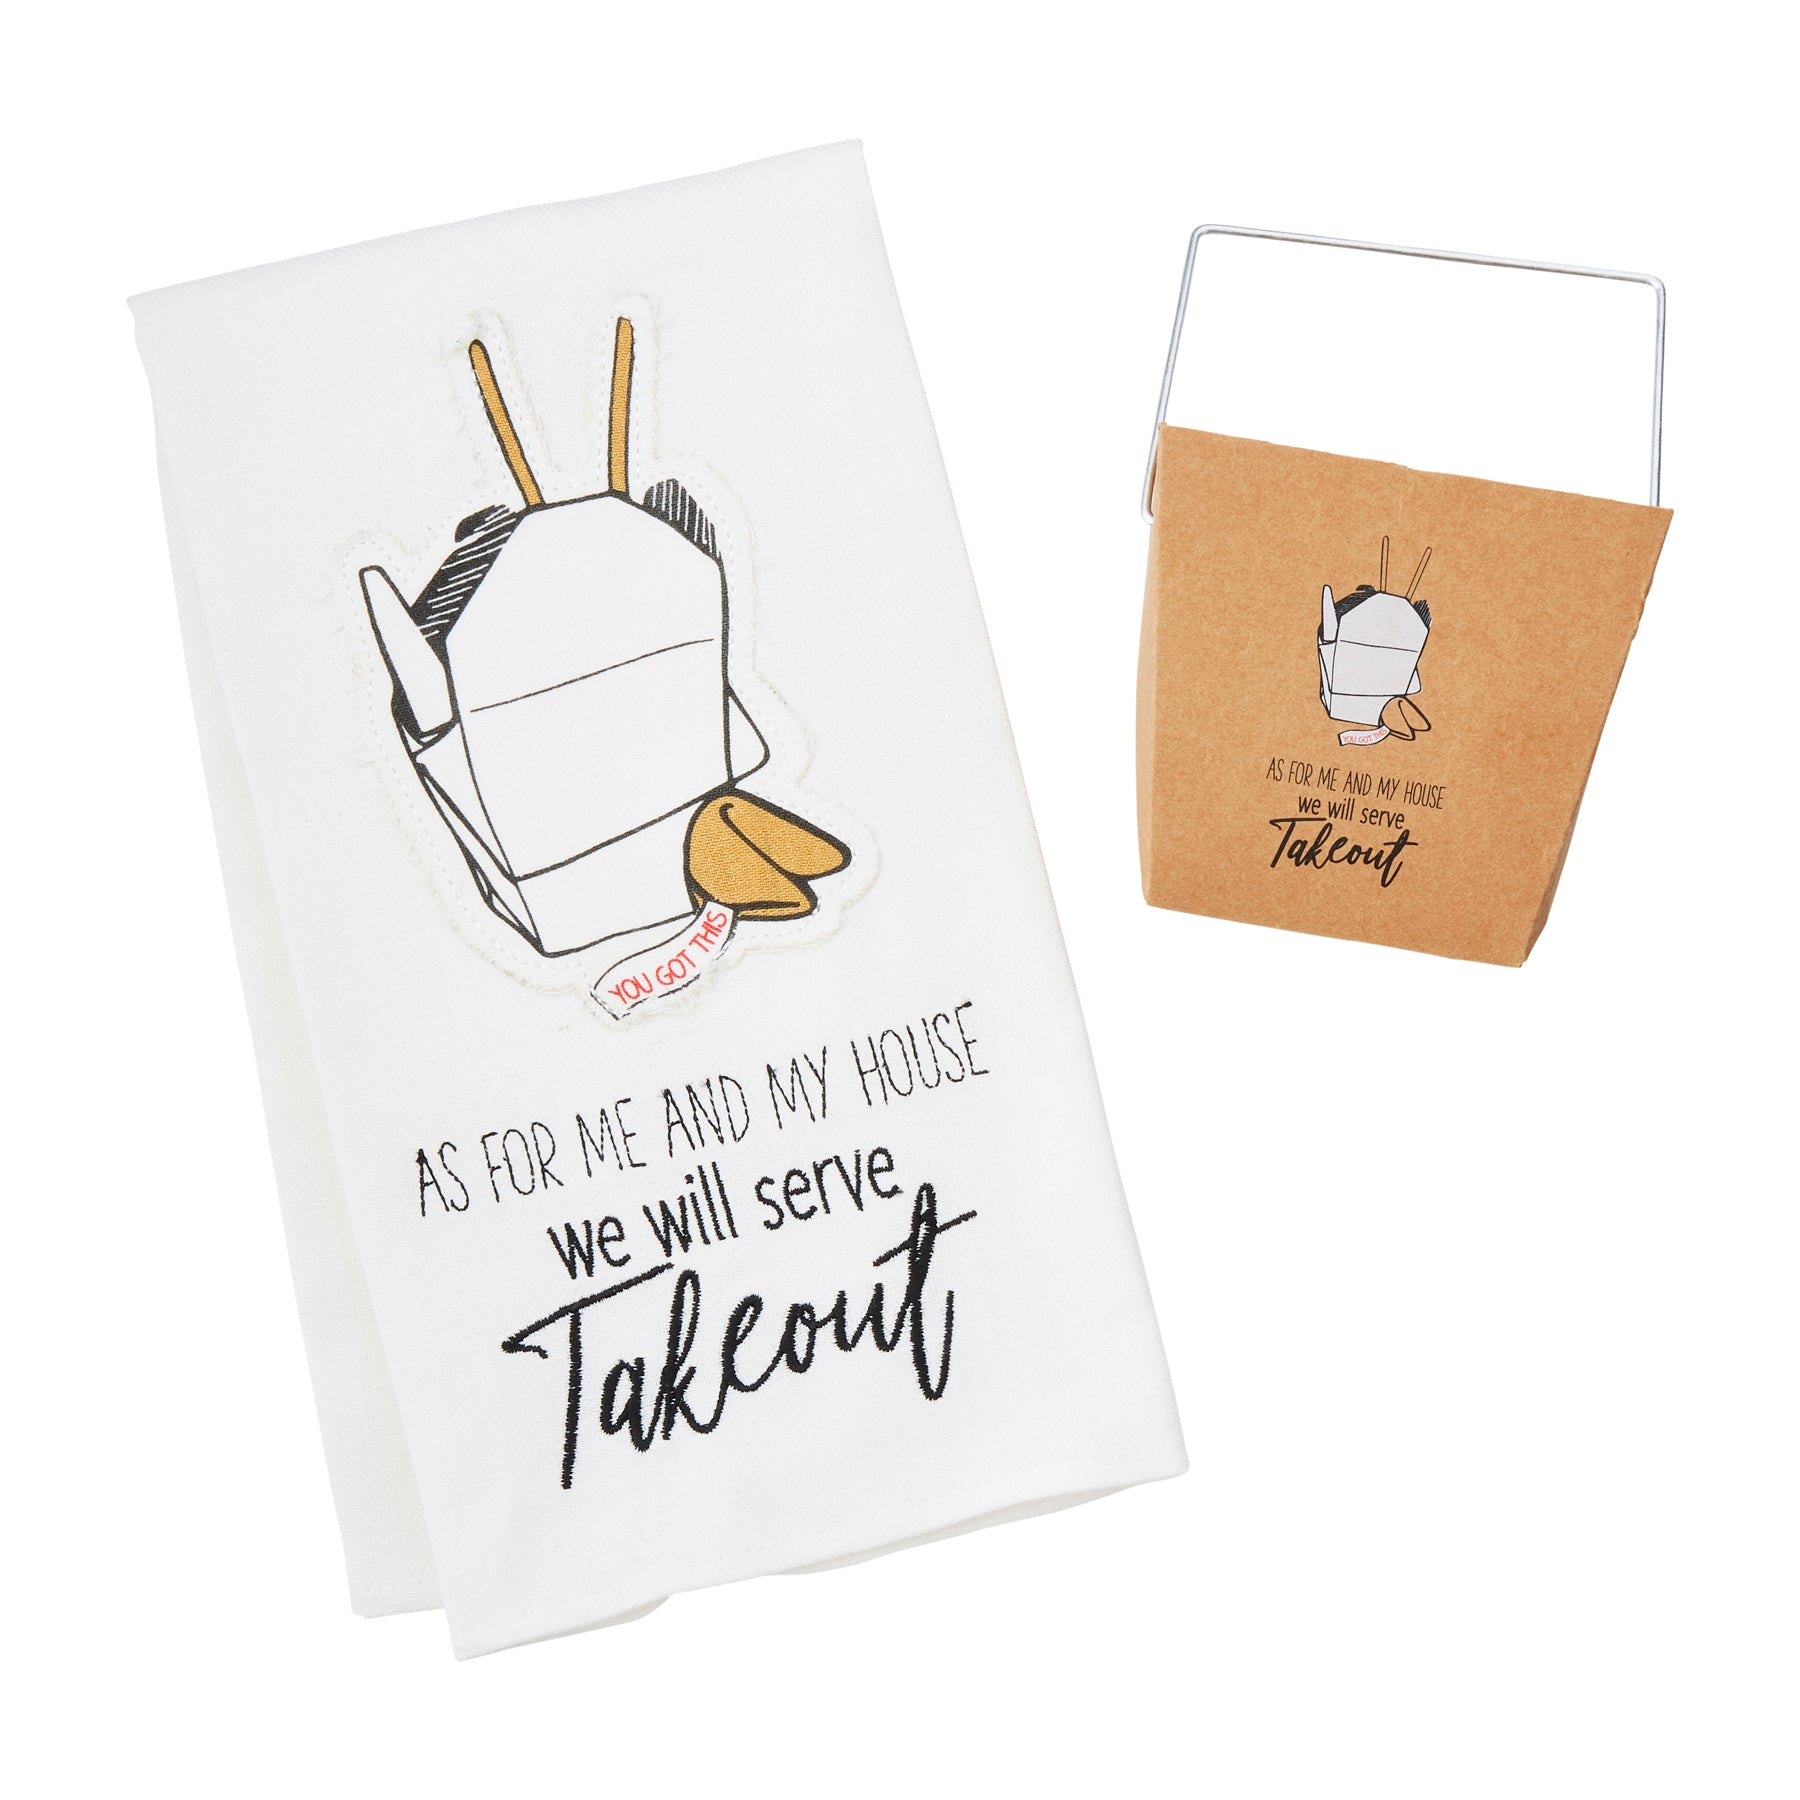 Mudpie "Take out" Tea Towels